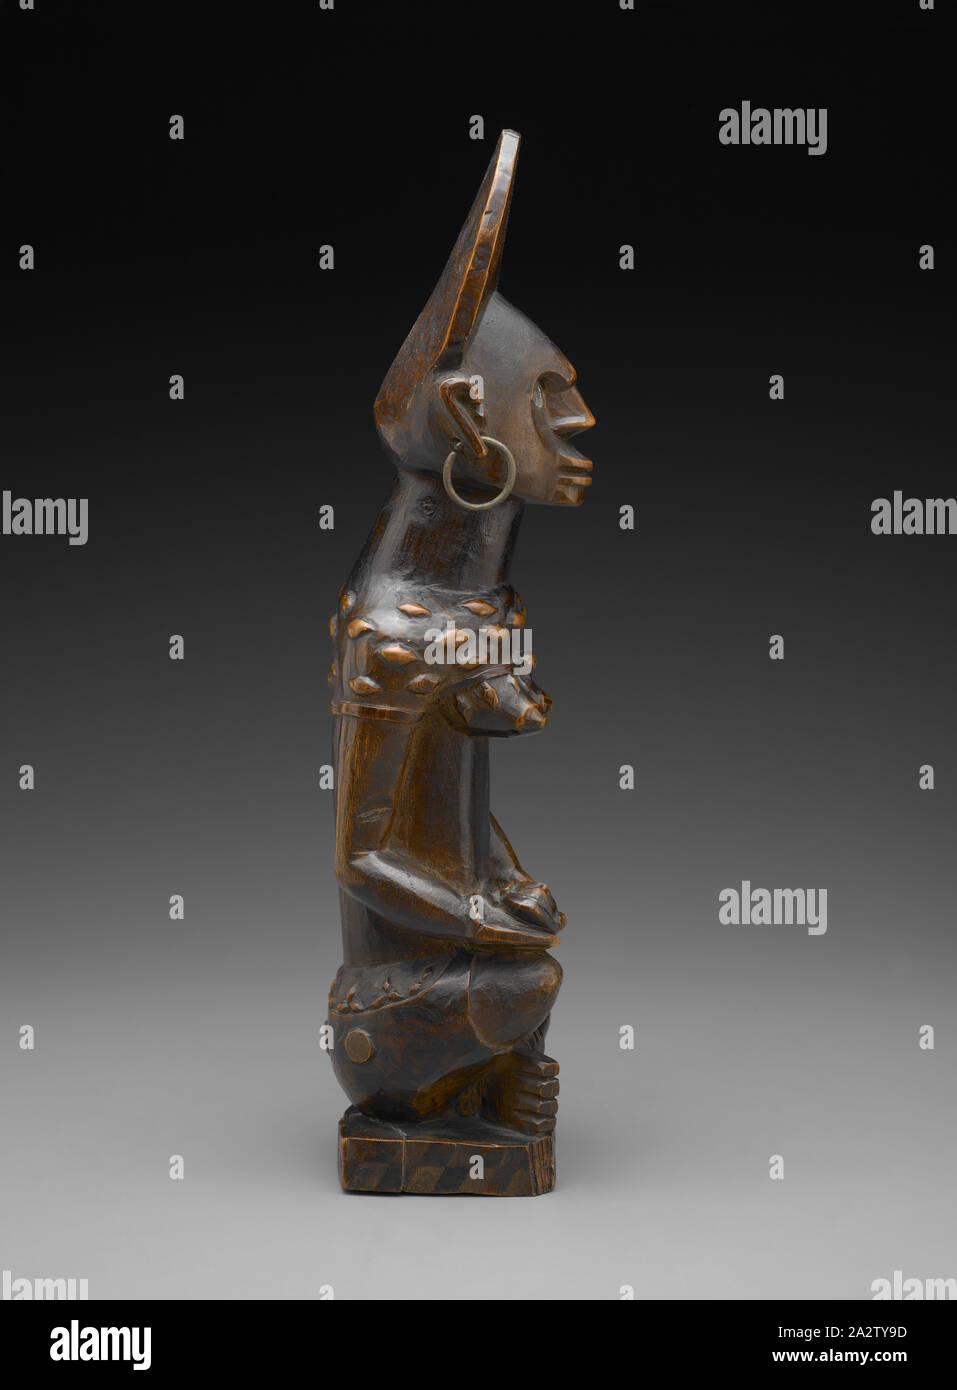 female figure with child (Phemba), Yombe people, late 19th century - early 20th century, wood, brass, glass, 13-1/2 x 4 x 3 in., African Art Stock Photo